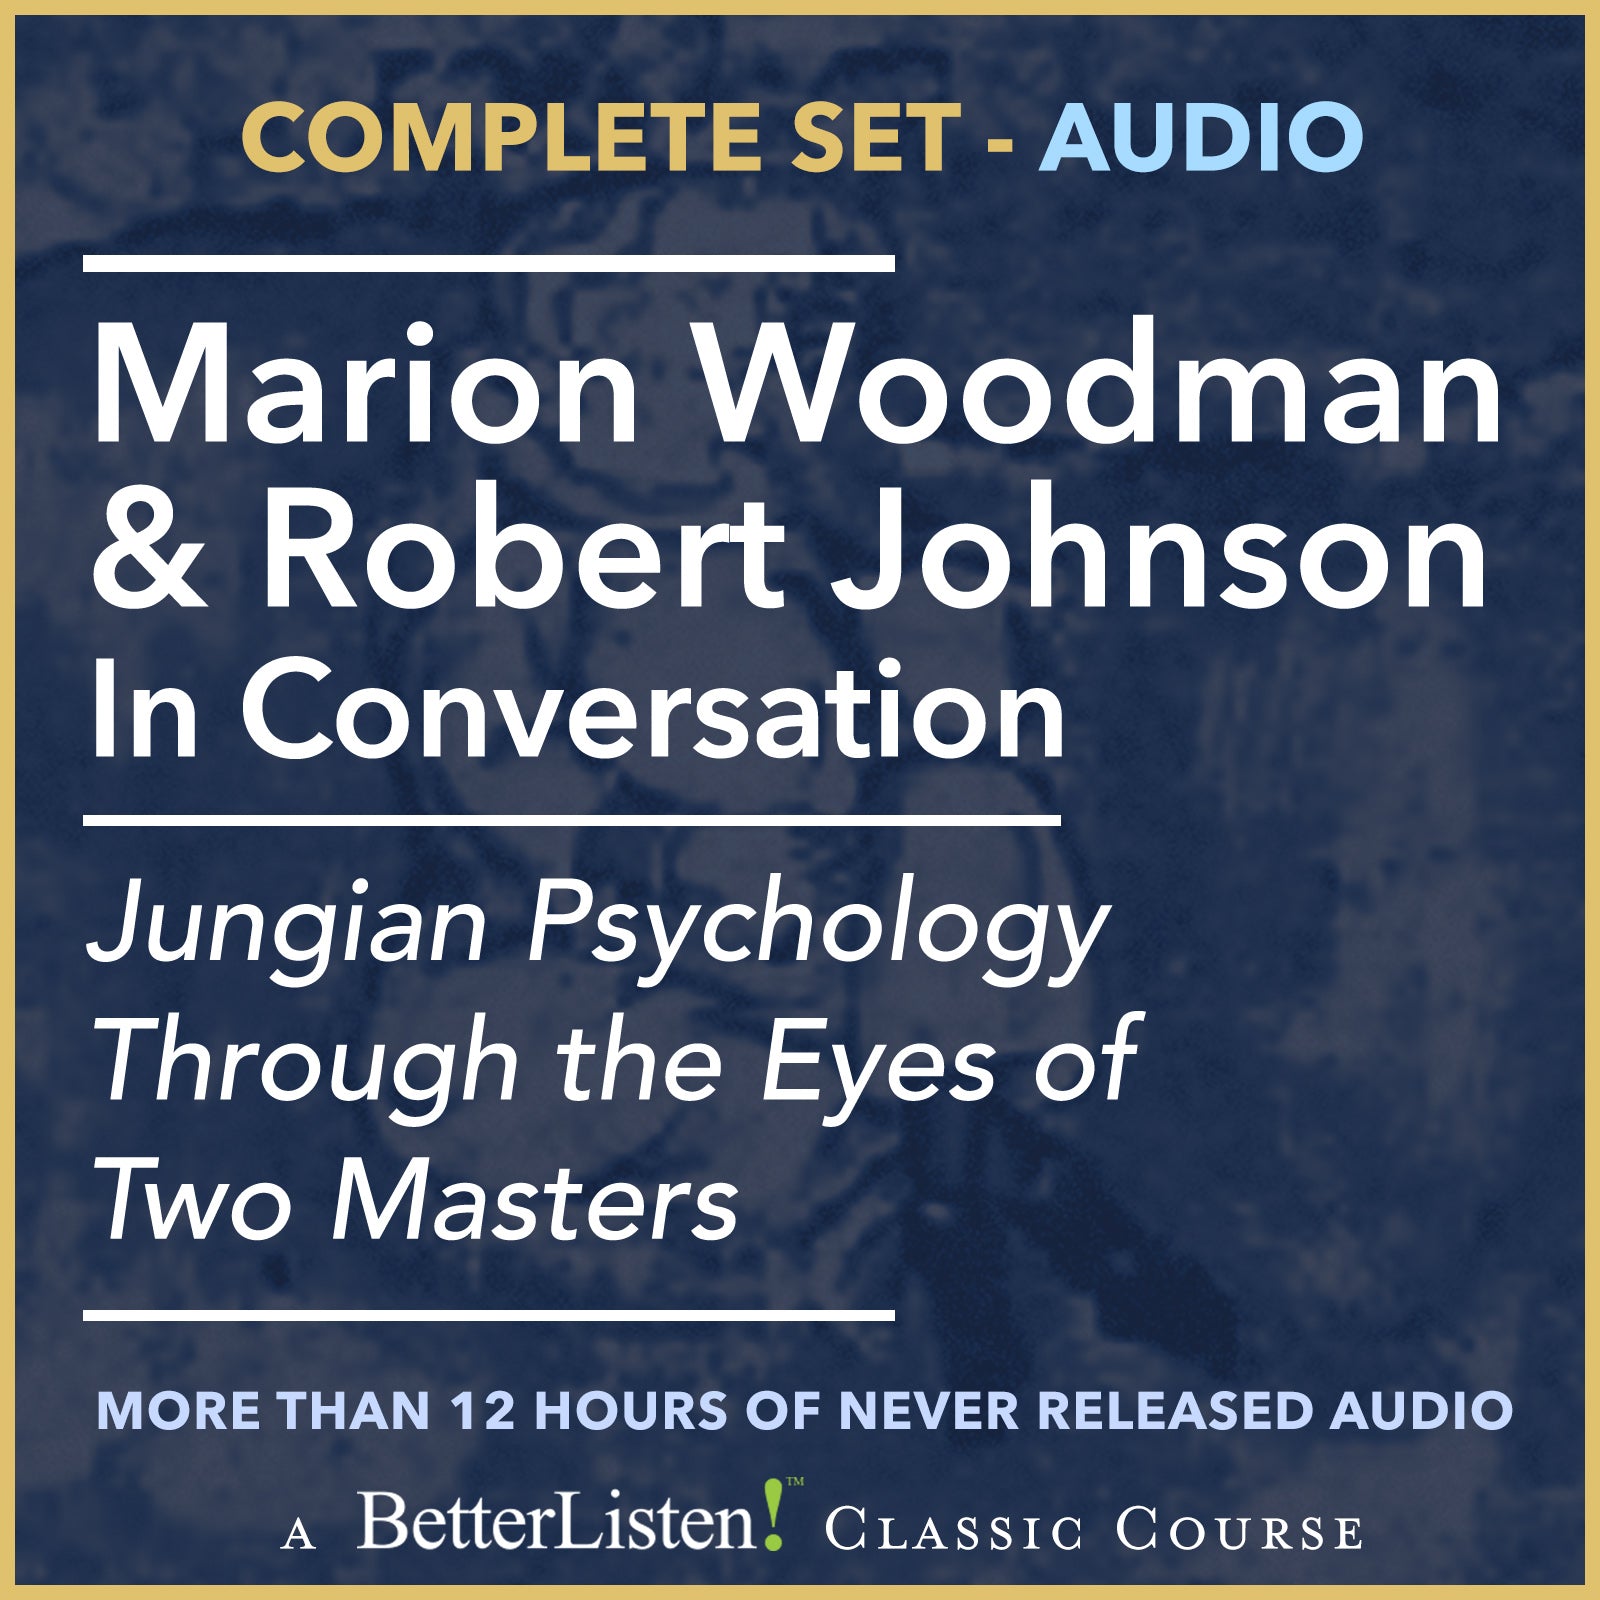 Marion Woodman & Robert Johnson In Conversation: Complete Set of Audio, Jungian Psychology Through The Eyes of Two Masters